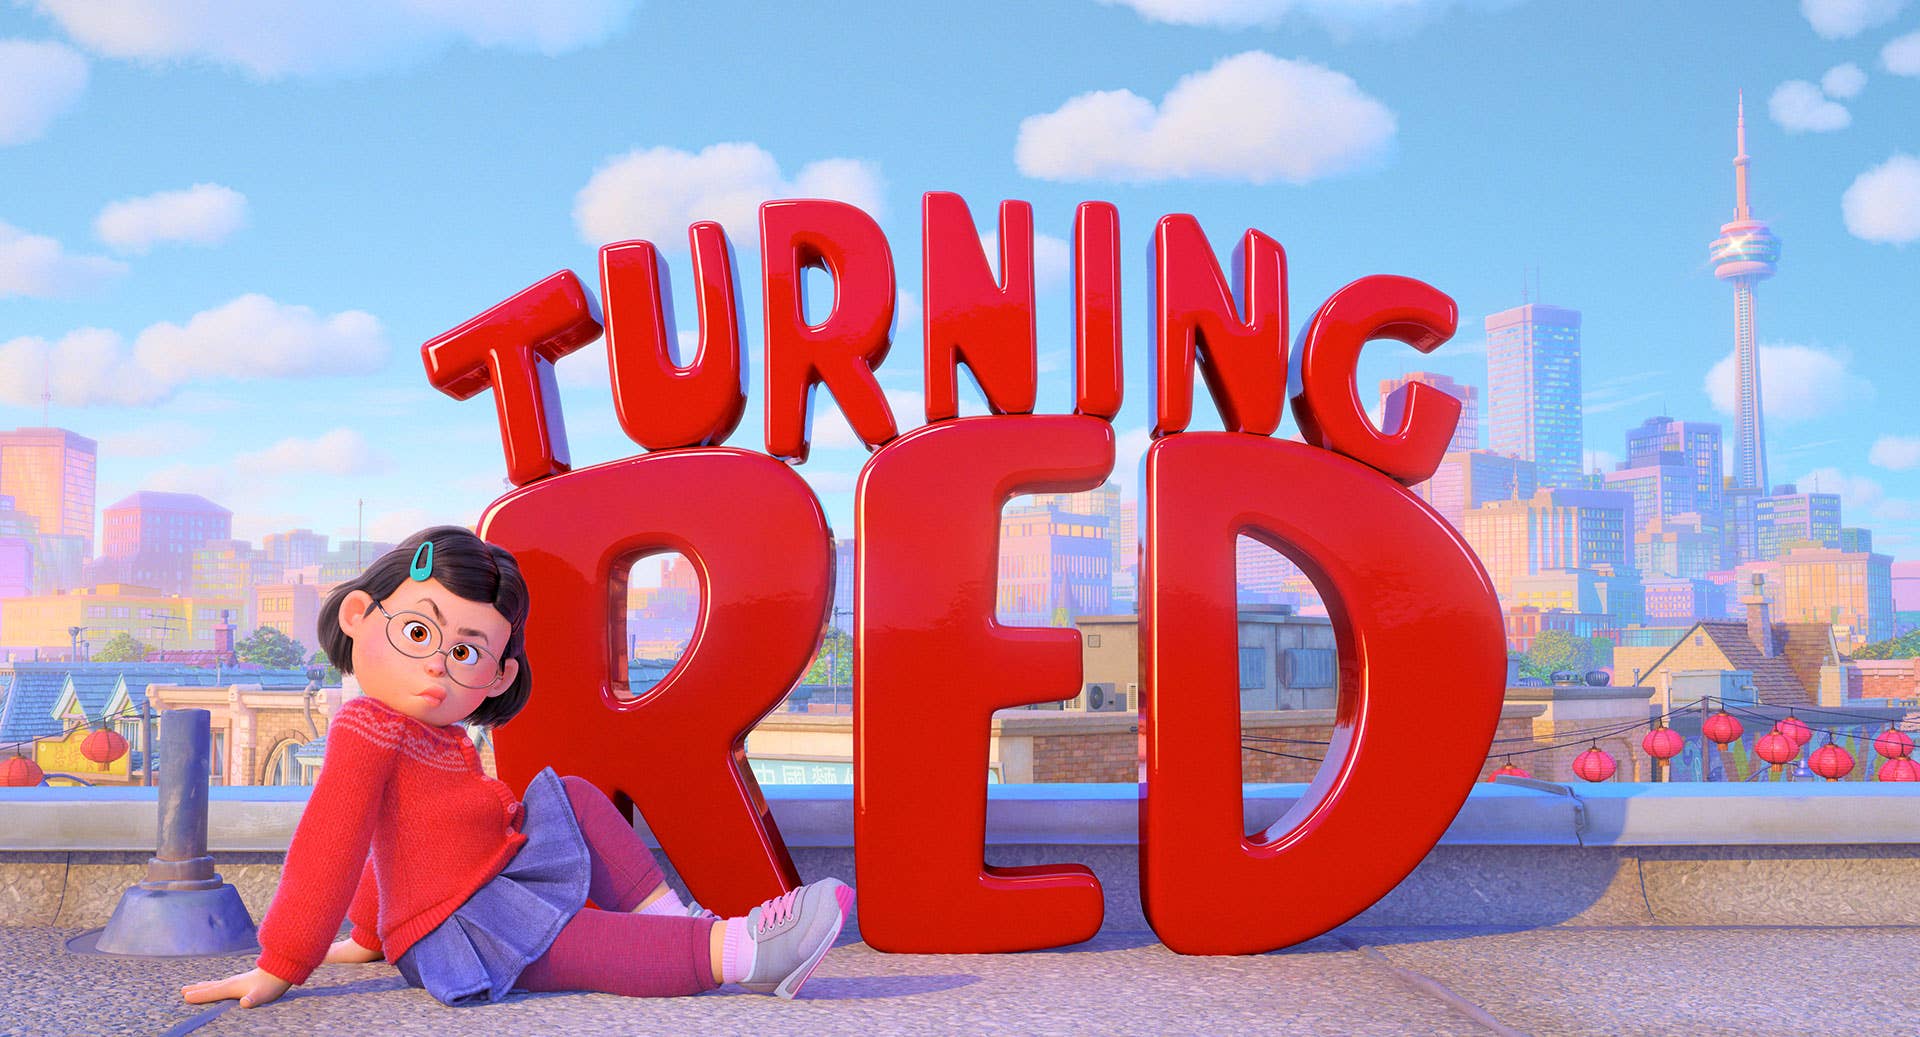 All the Toronto References We Could Spot in Pixar's 'Turning Red